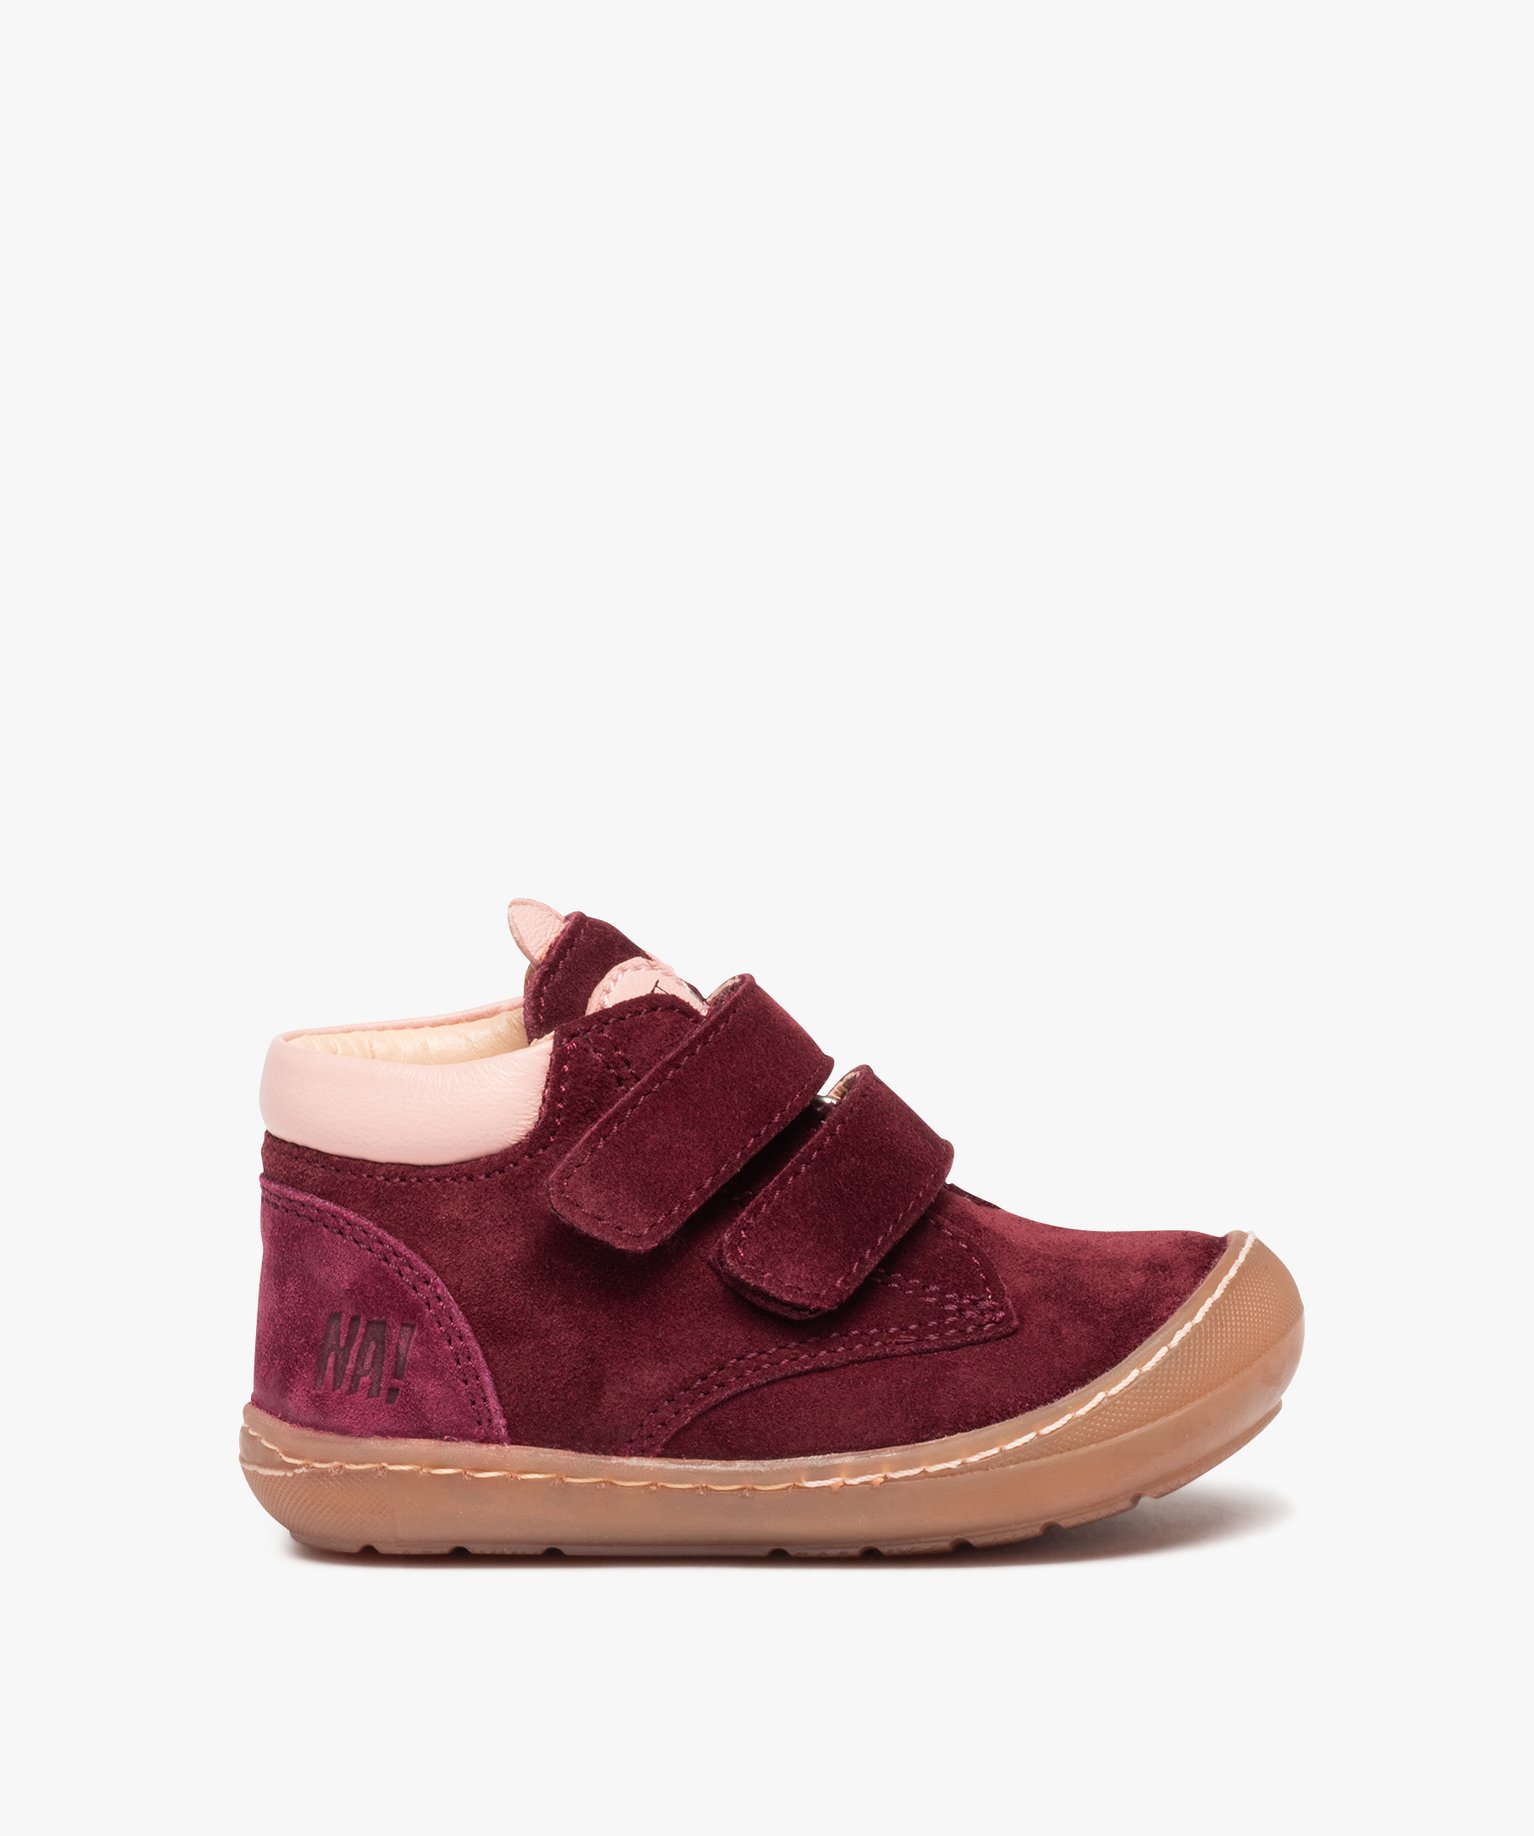 chaussures premiers pas bebe fille dessus cuir a scratchs - na! rouge